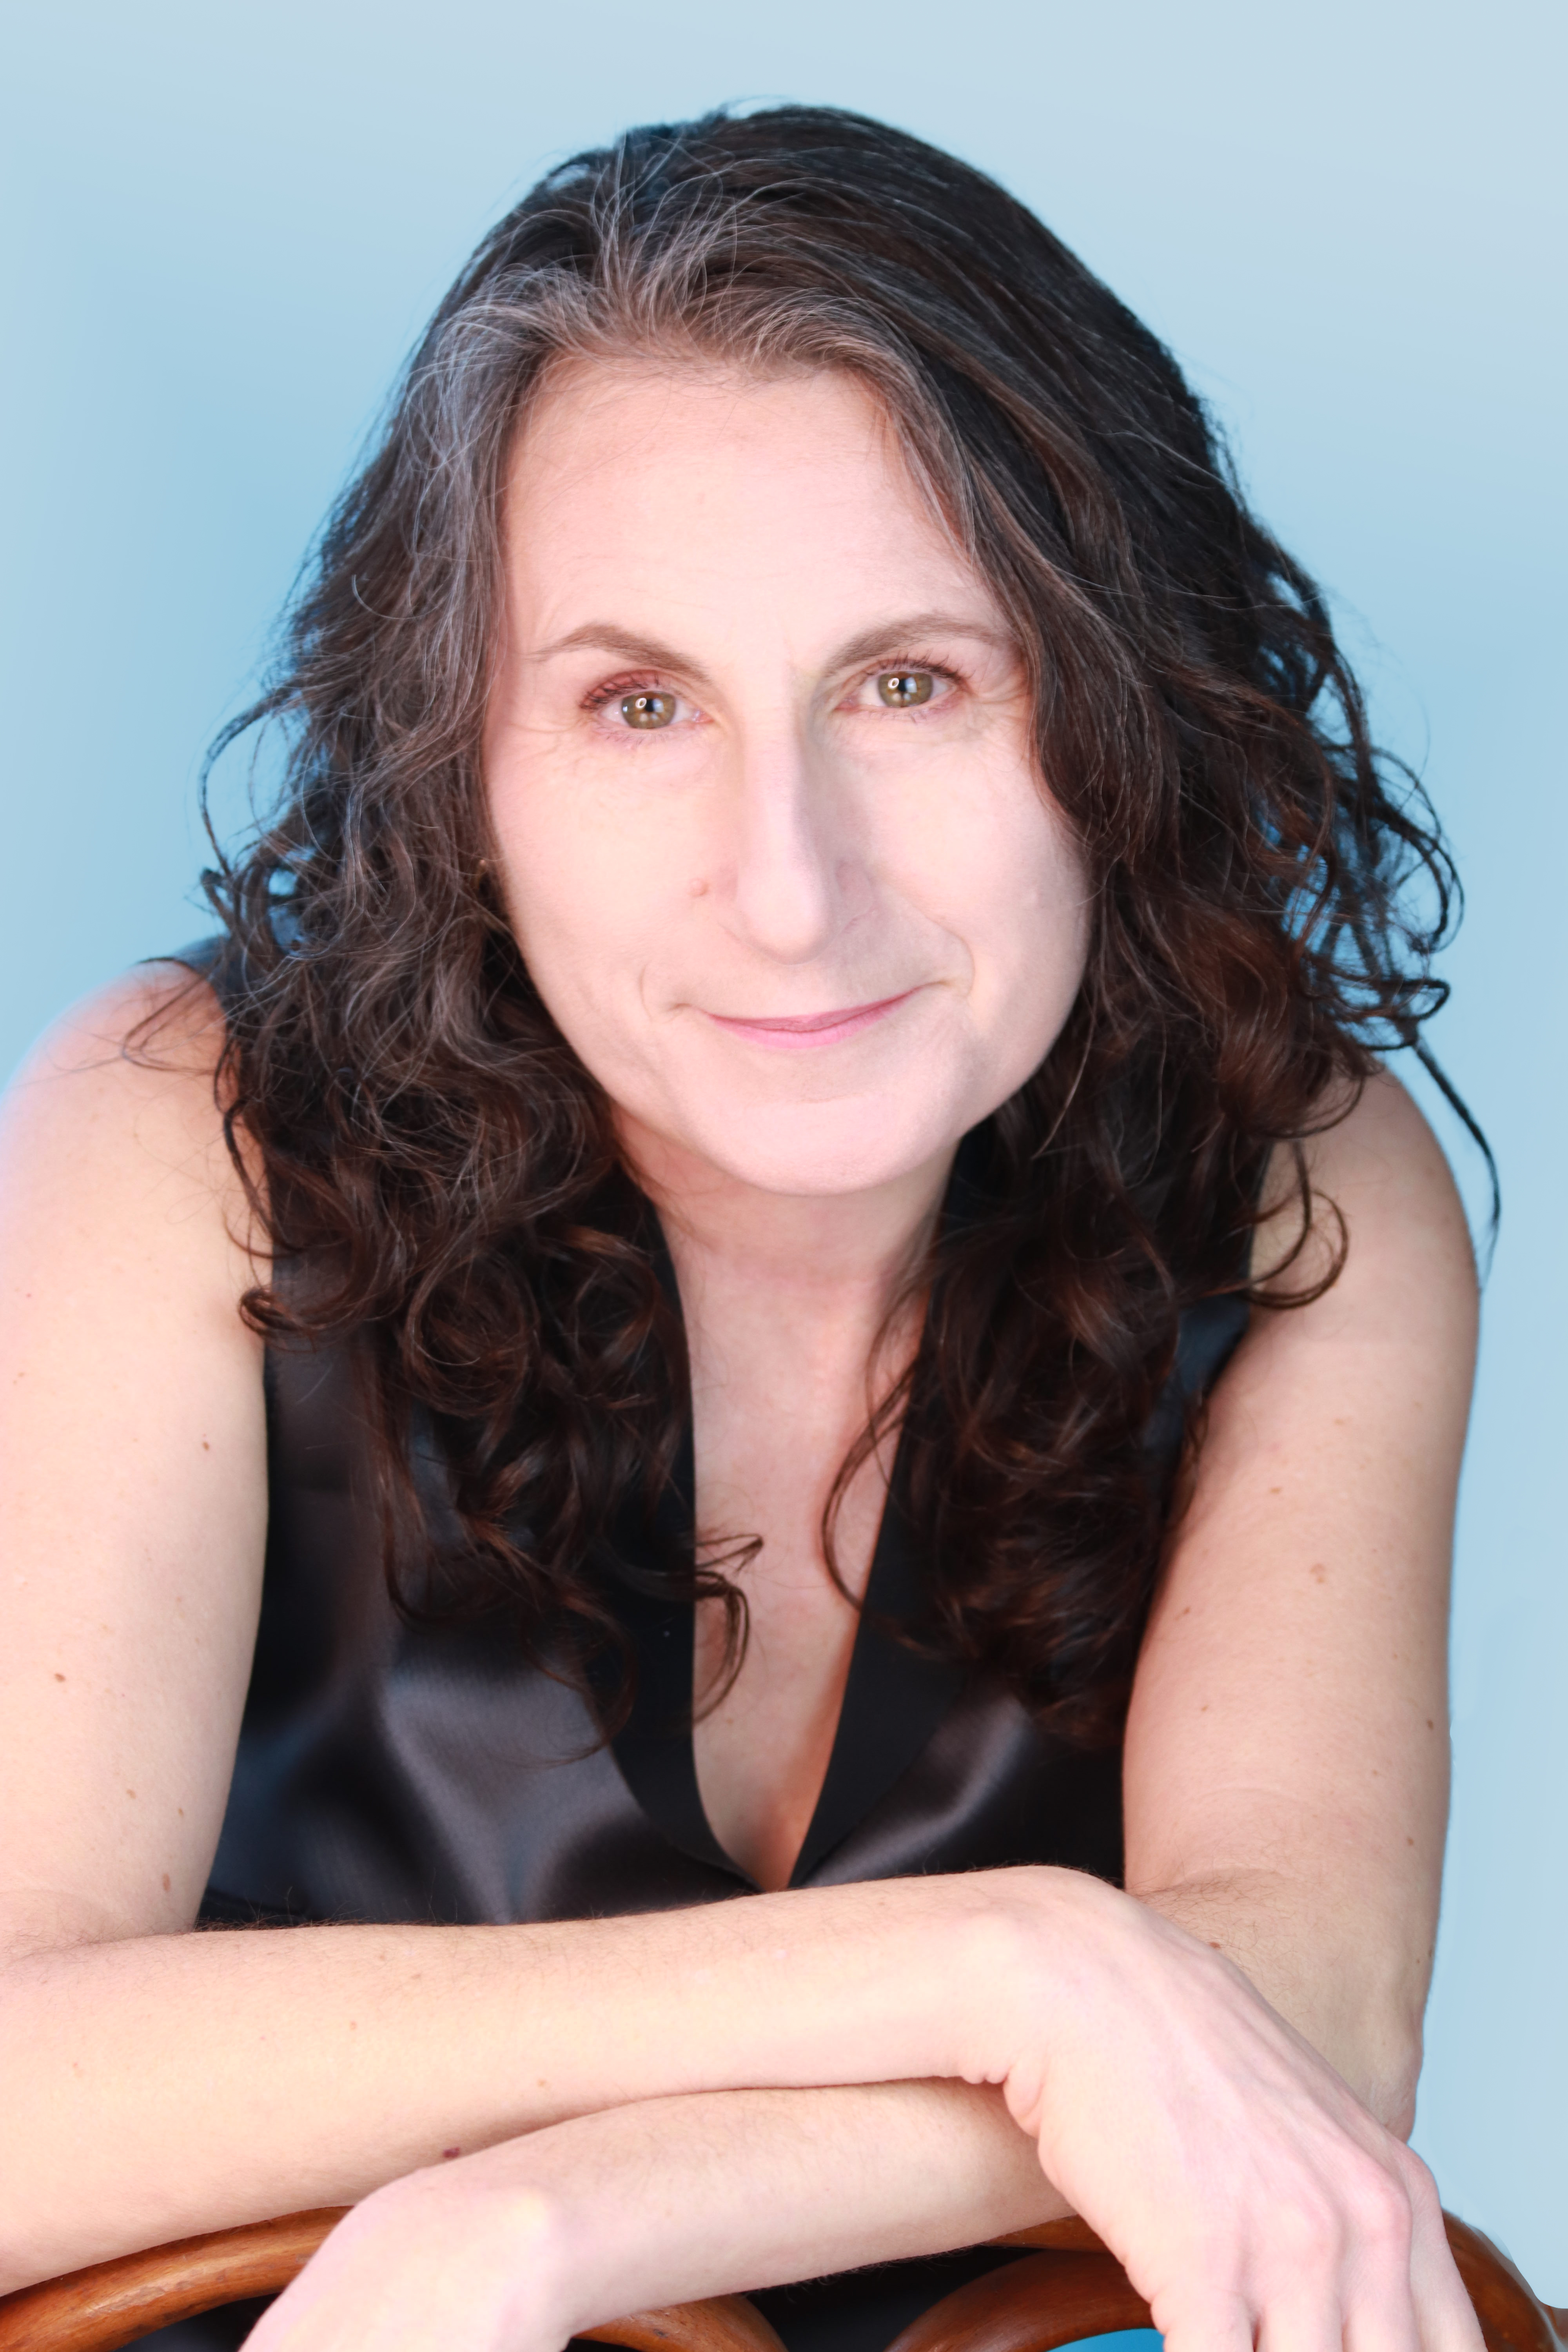 Portrait of Brett Ashley Kaplan. She is a white woman with dark hair with some gray on the part. She is wearing a black sleeveless shirt and looking into the camera. Her arms are folded across the back of a chair. The background is light blue. Photo courtesy of Brett Ashley Kaplan. 